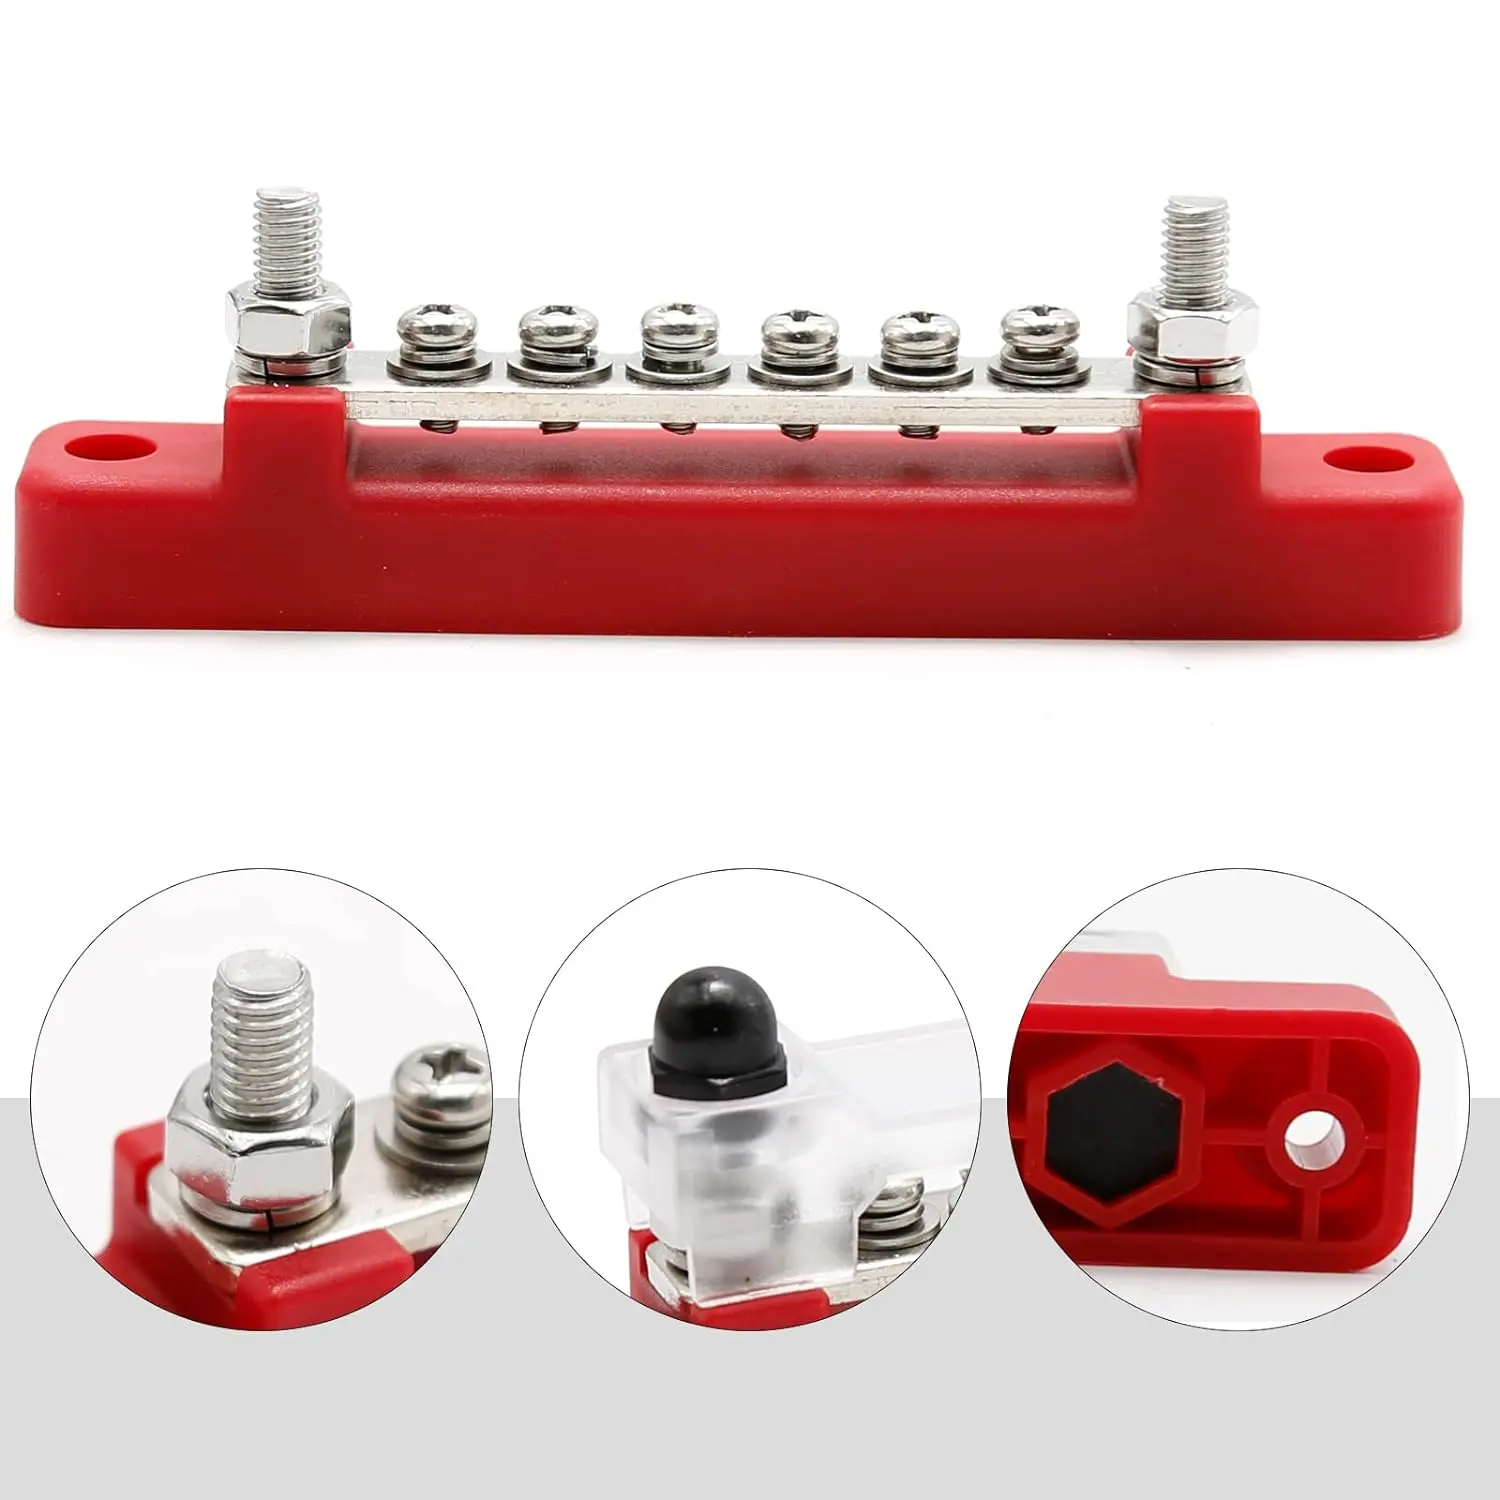 Distribution Terminal Block with Cover with Terminal Studs M4 M6Terminal Screws Battery Bus Bar with Ring Terminals for Car Boat